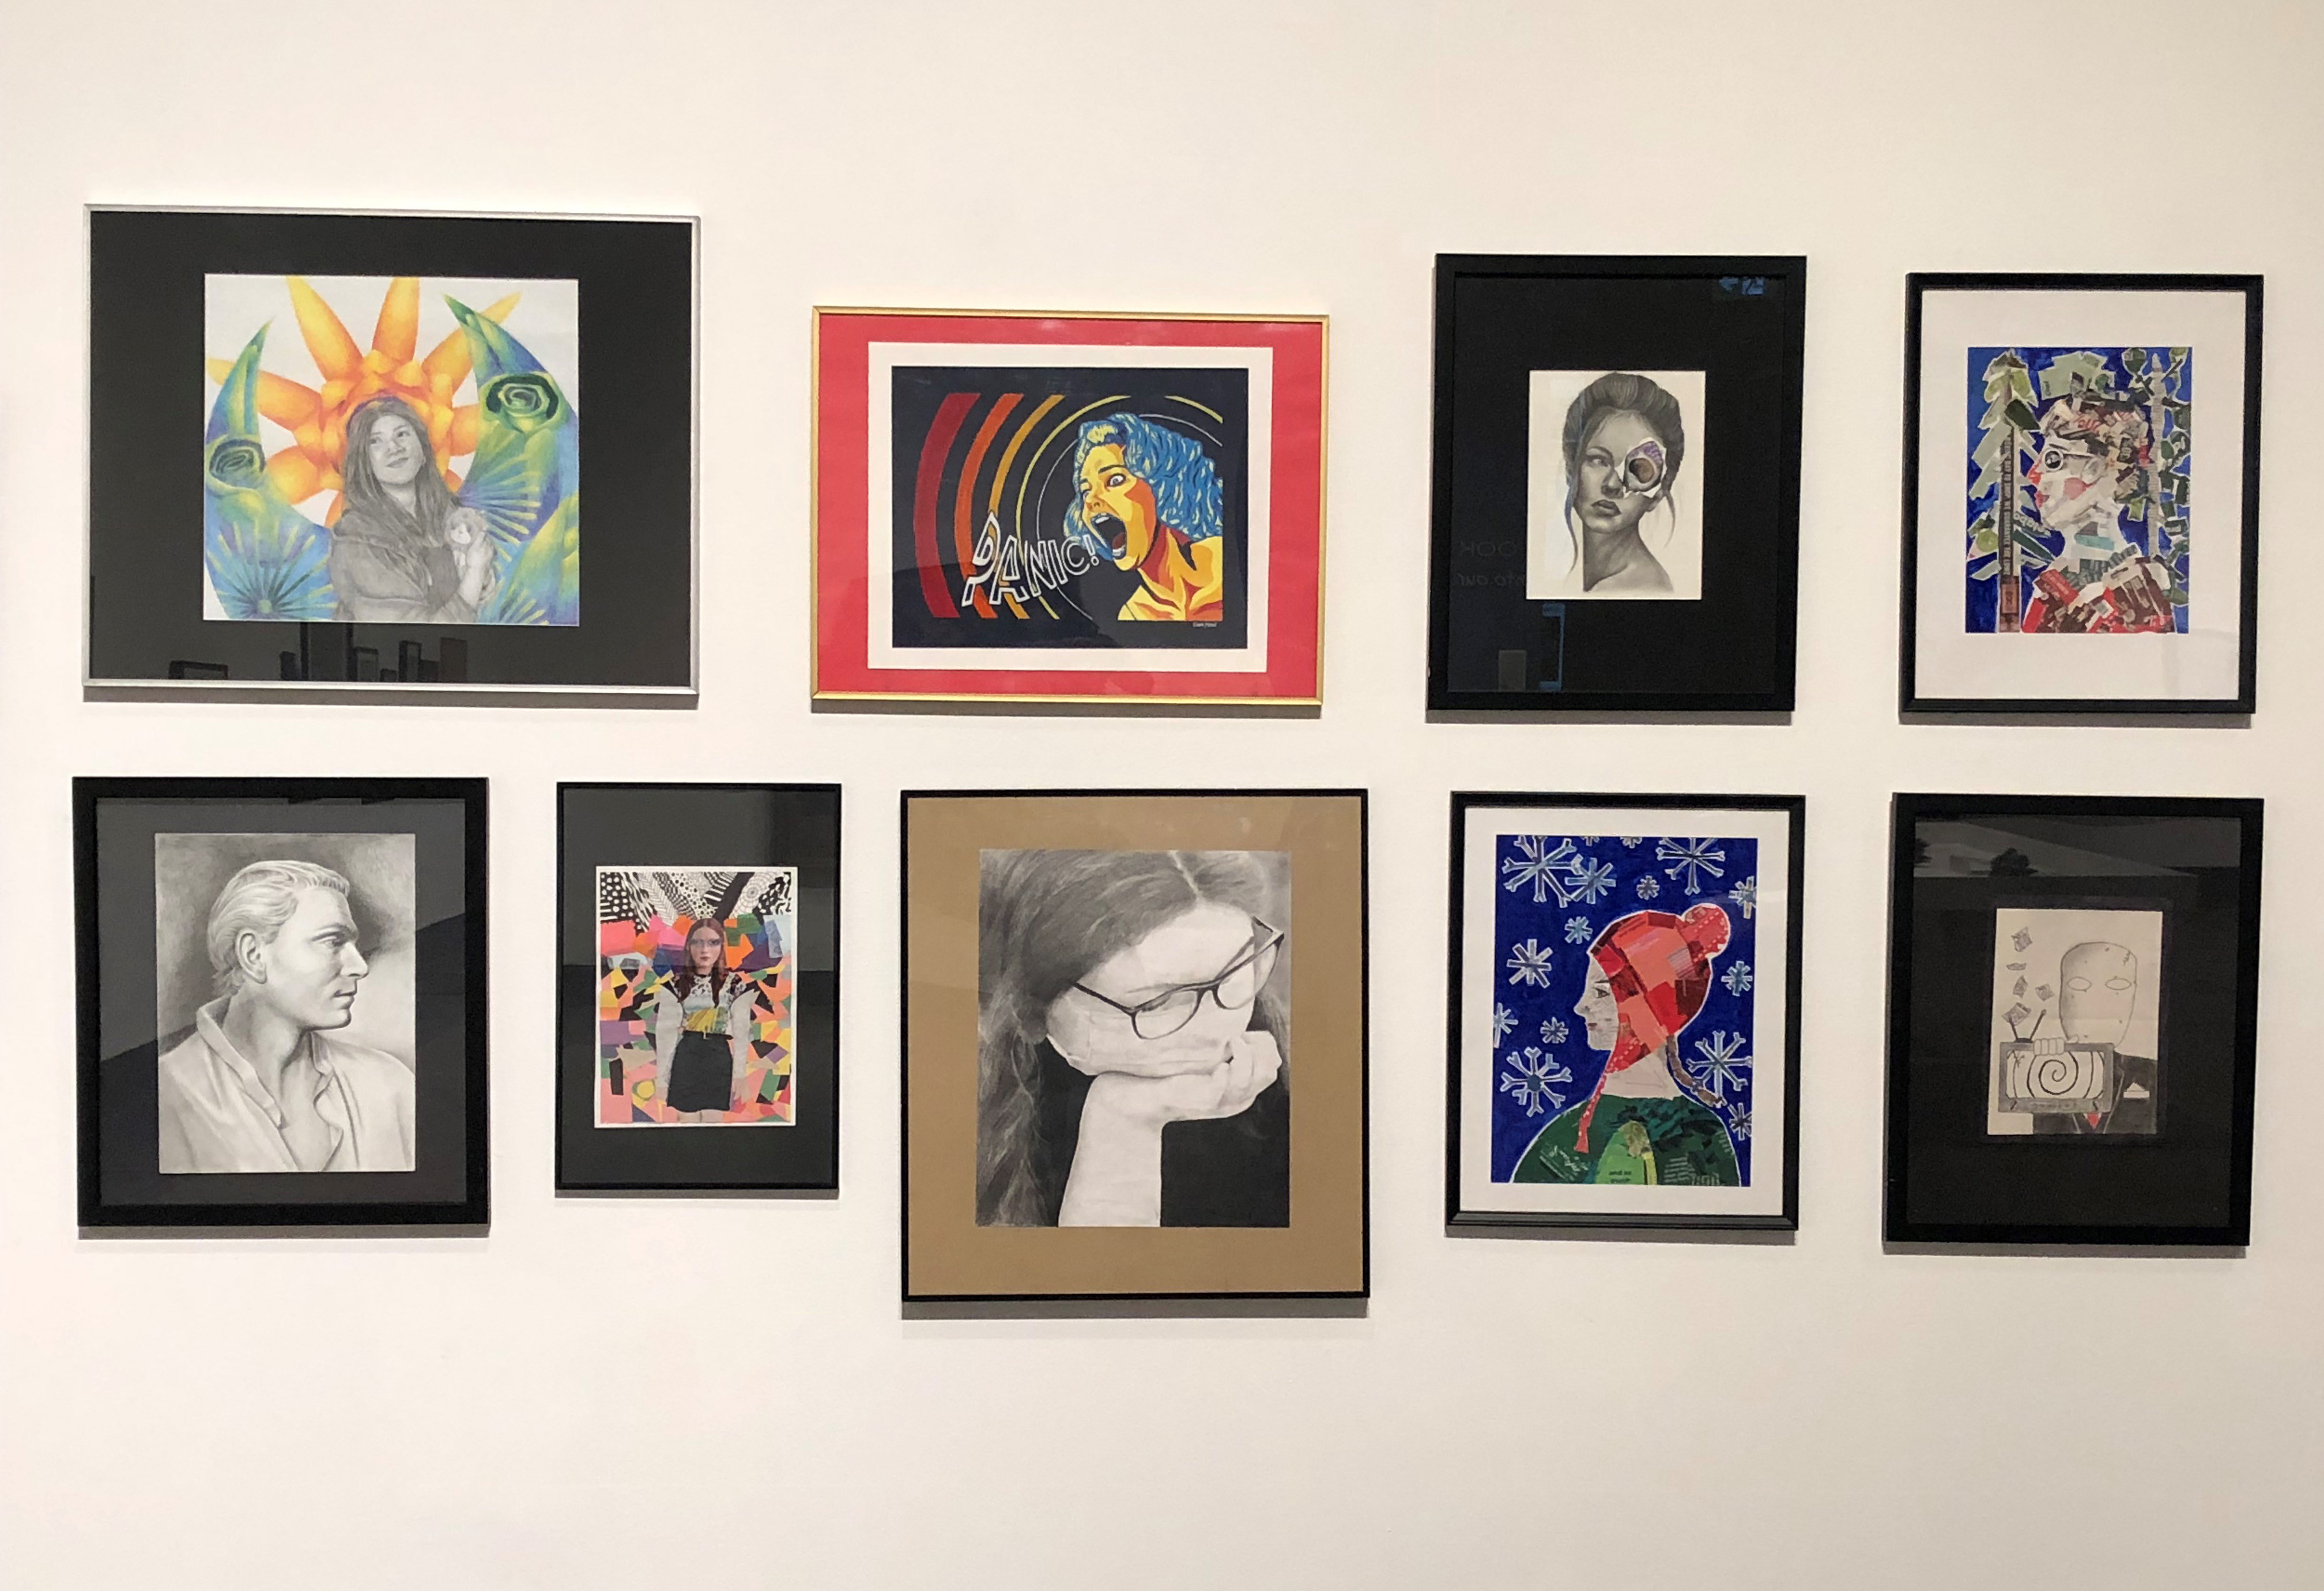 Installation view of a series of nine framed portrait works by students showing a range of styles, arranged in two horizontal rows on a white wall